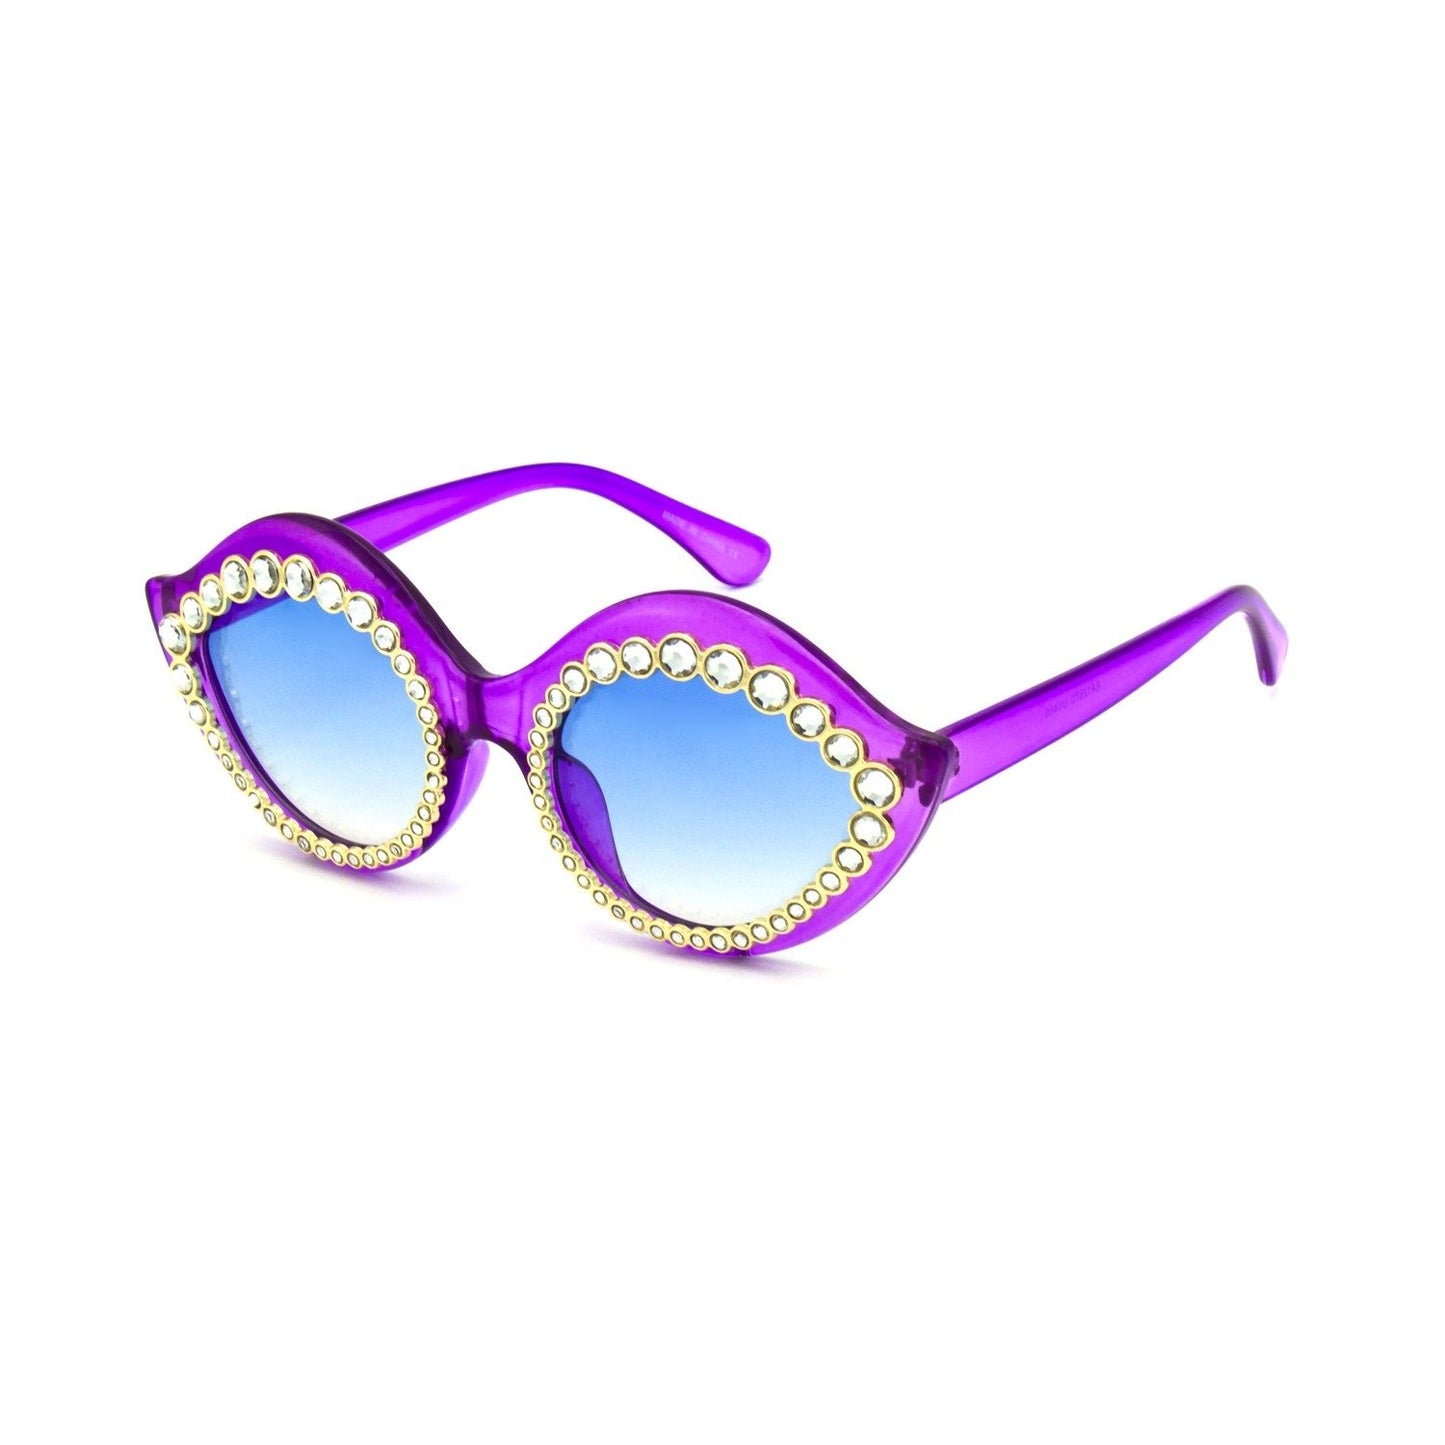 “Your Problem” No Shade Cat Eye - Weekend Shade Sunglasses